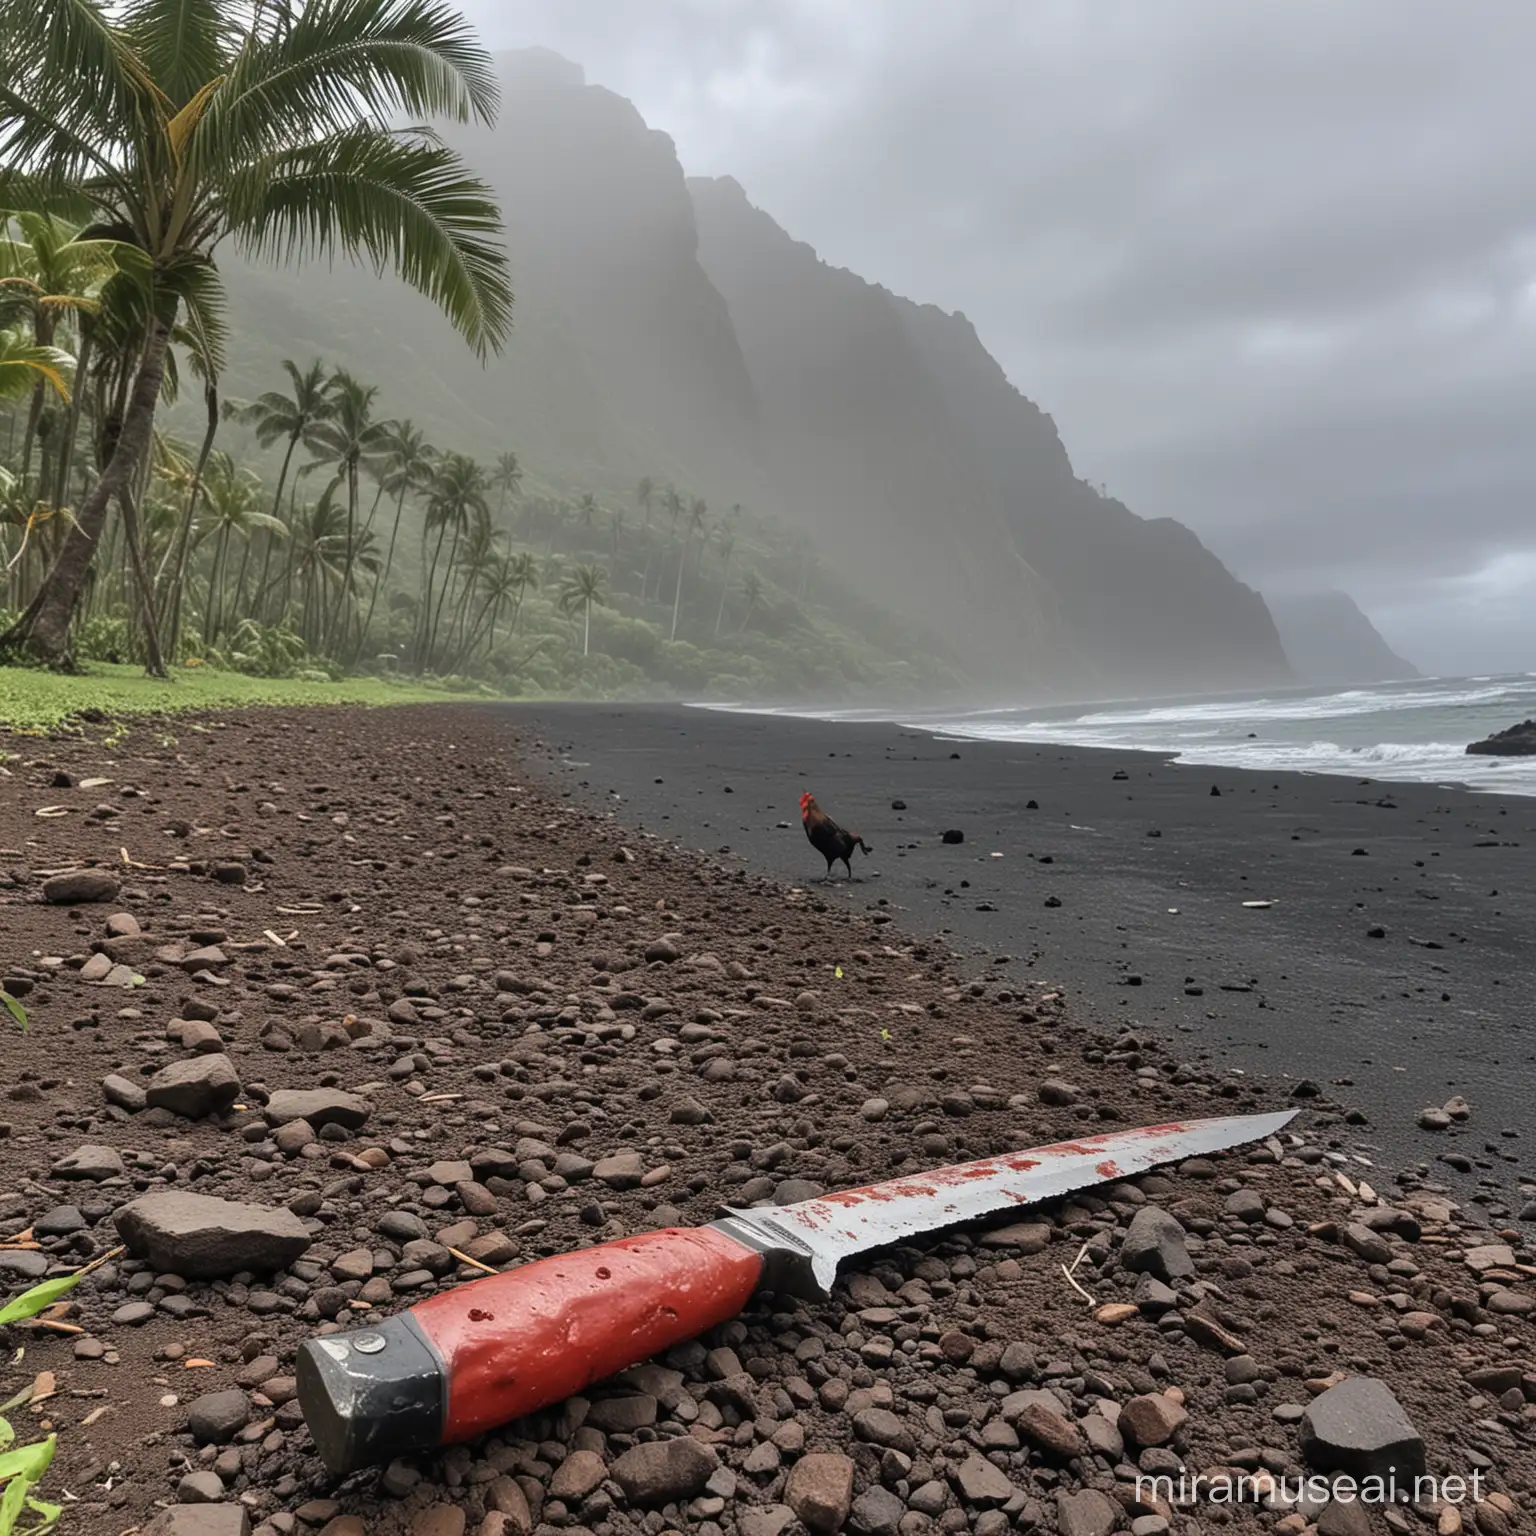 Reunion Island Landscape with Bloodied Machete and Rooster